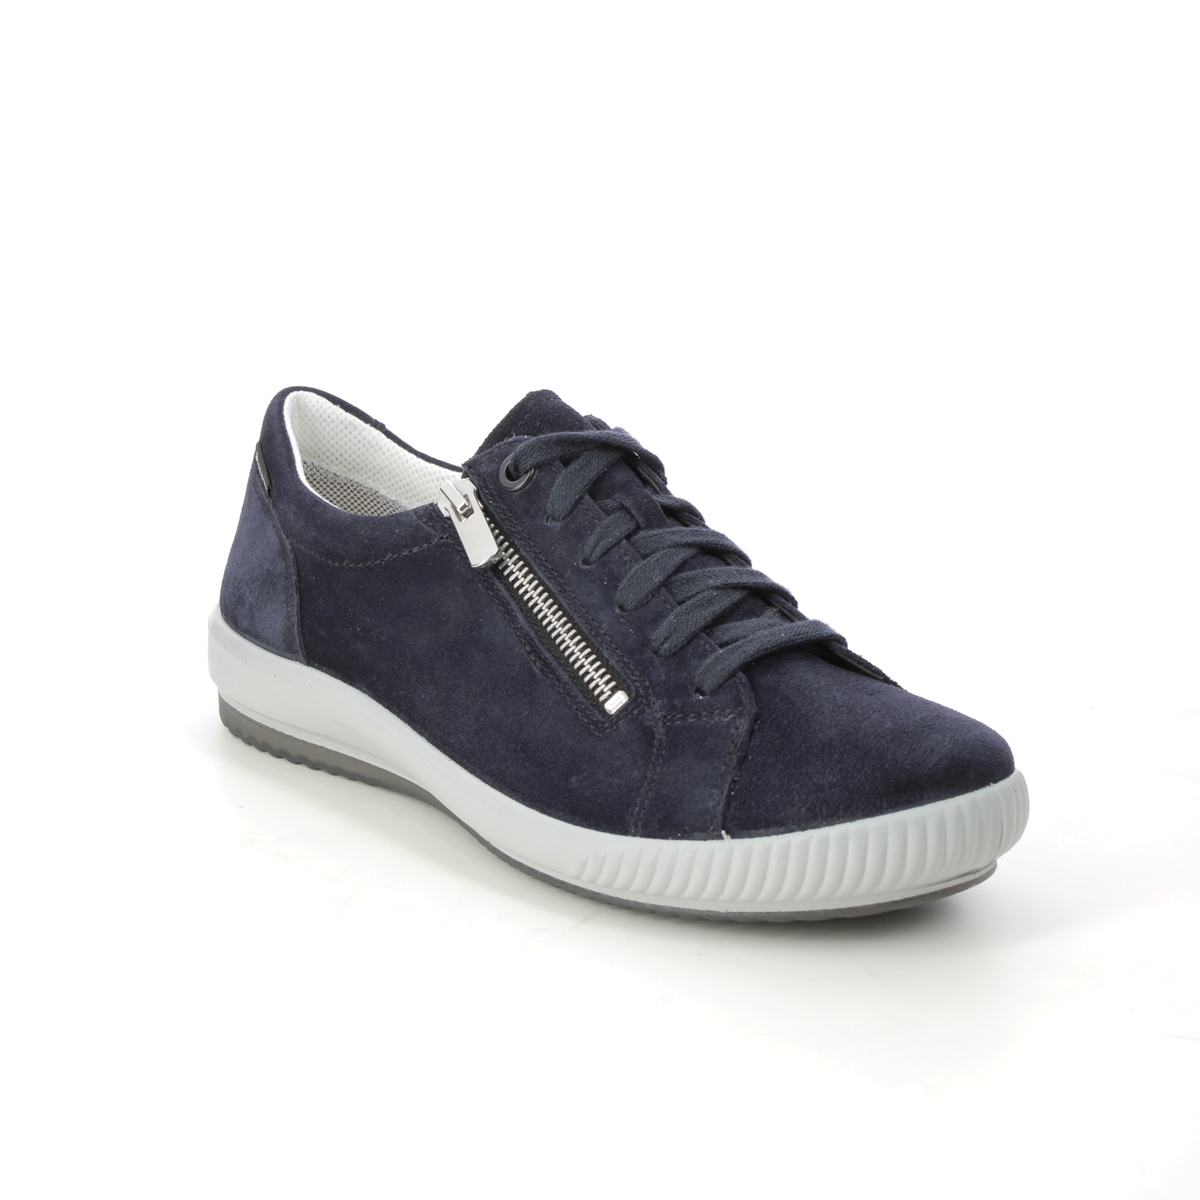 Legero Tanaro 5 Gtx Navy Suede Womens Lacing Shoes 2000219-8000 In Size 4.5 In Plain Navy Suede